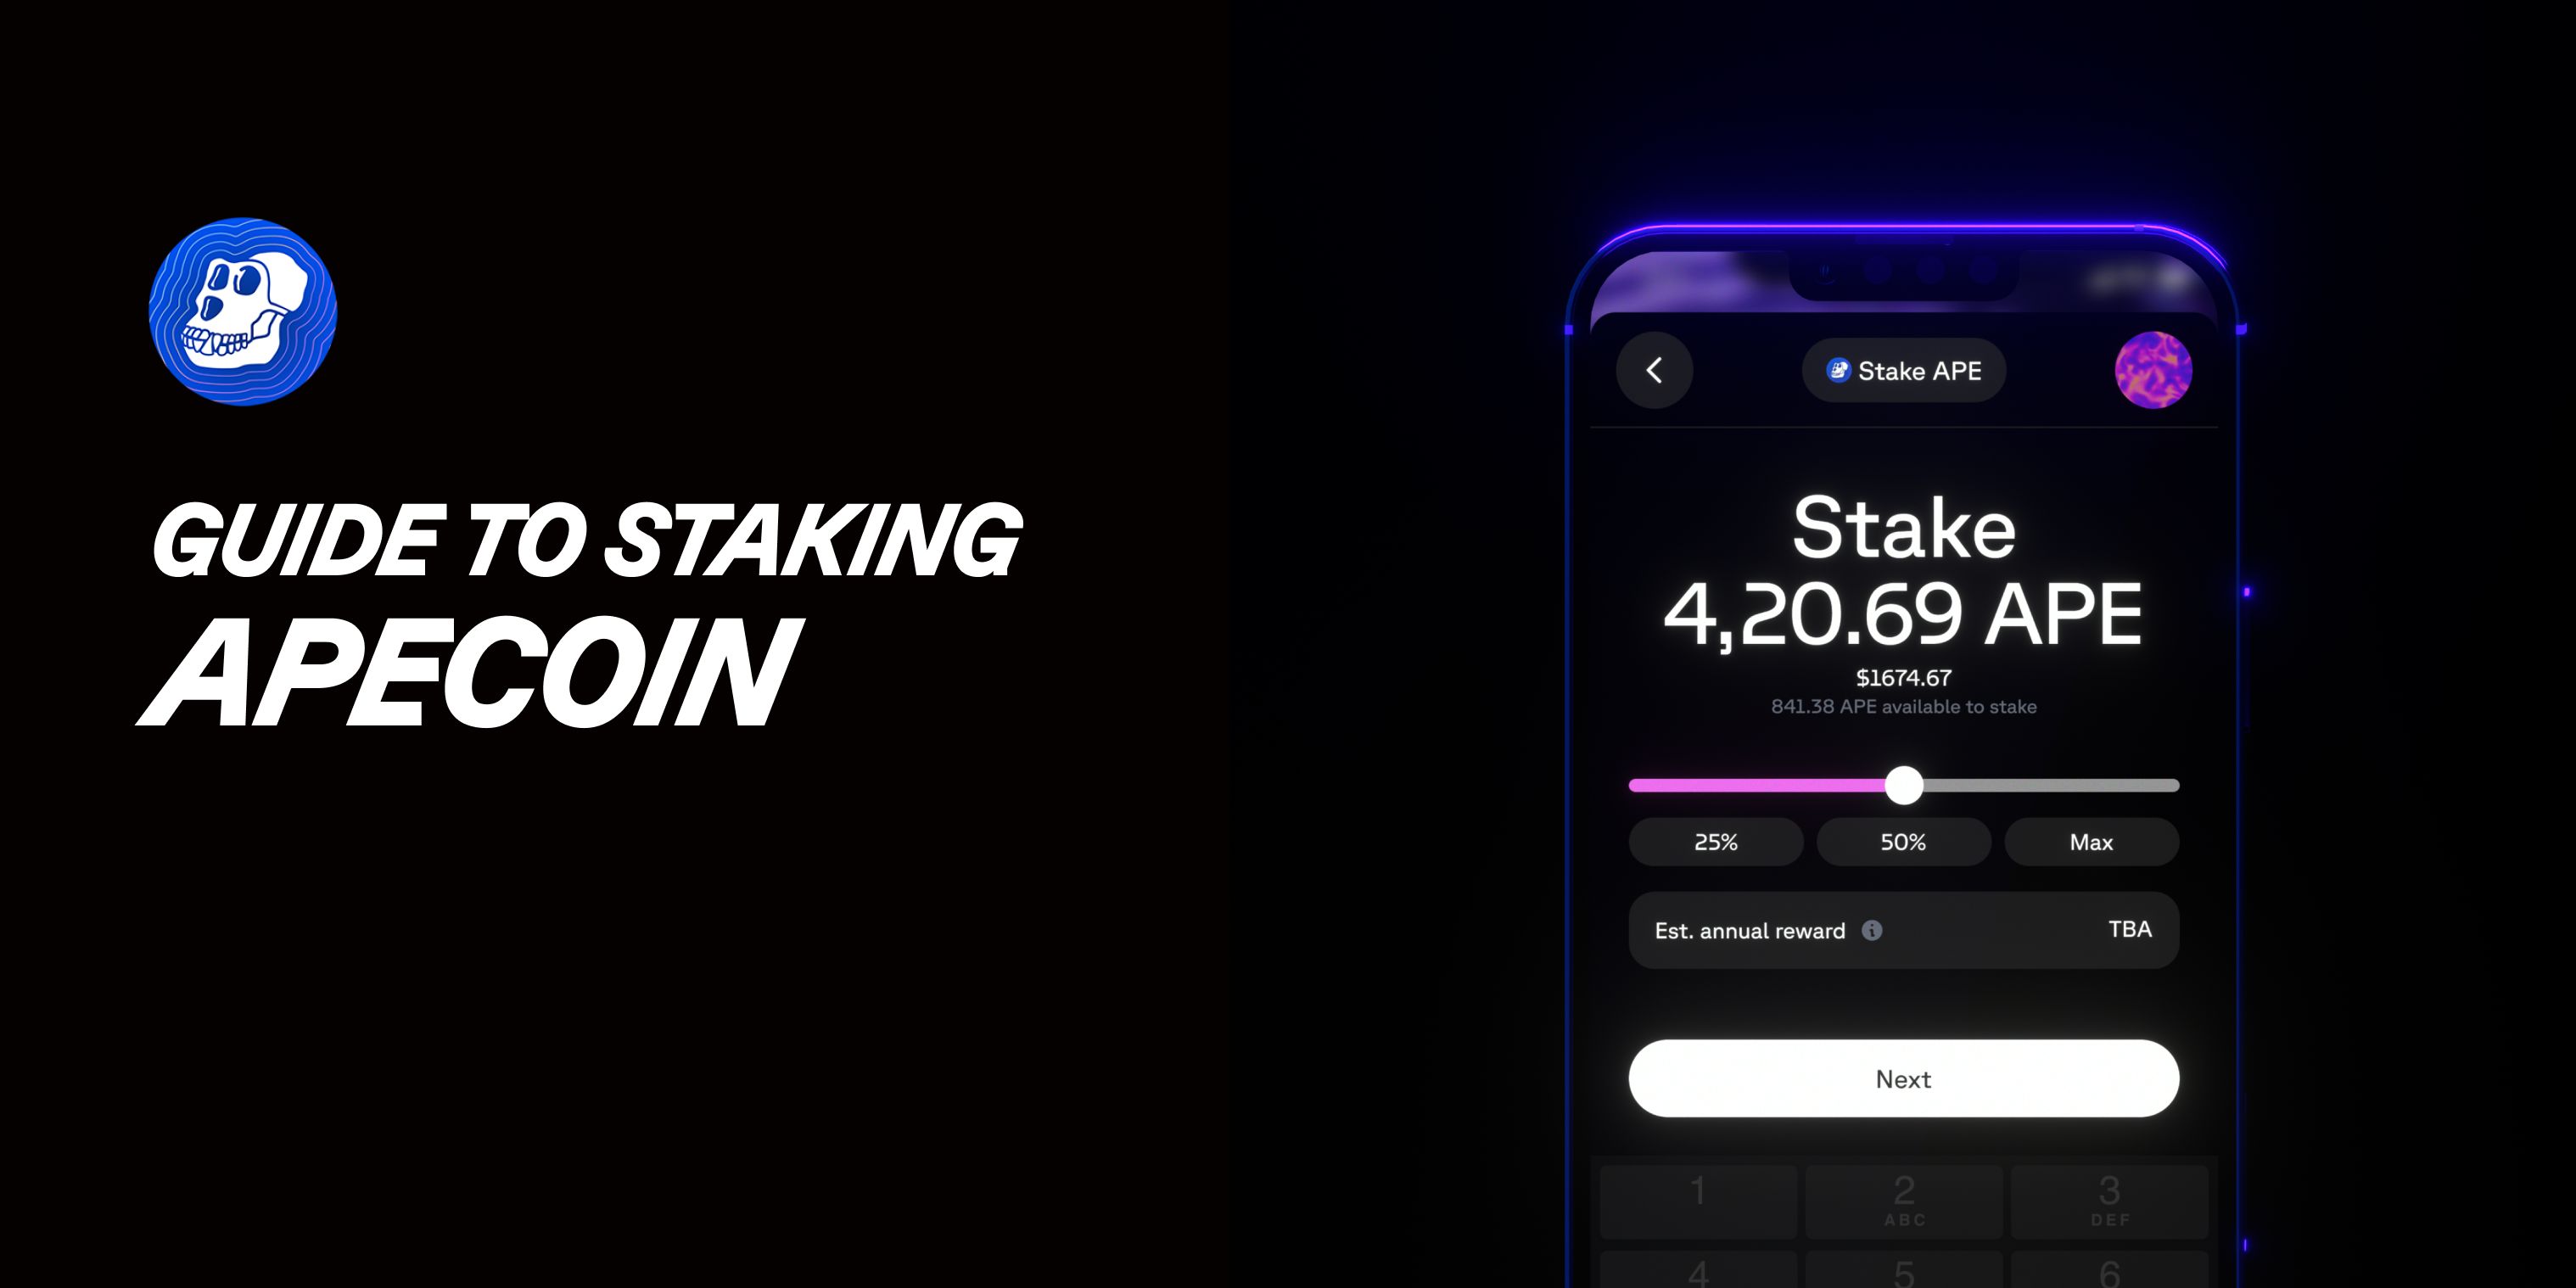 Cover Image for A step-by-step guide to ApeCoin staking on Omni